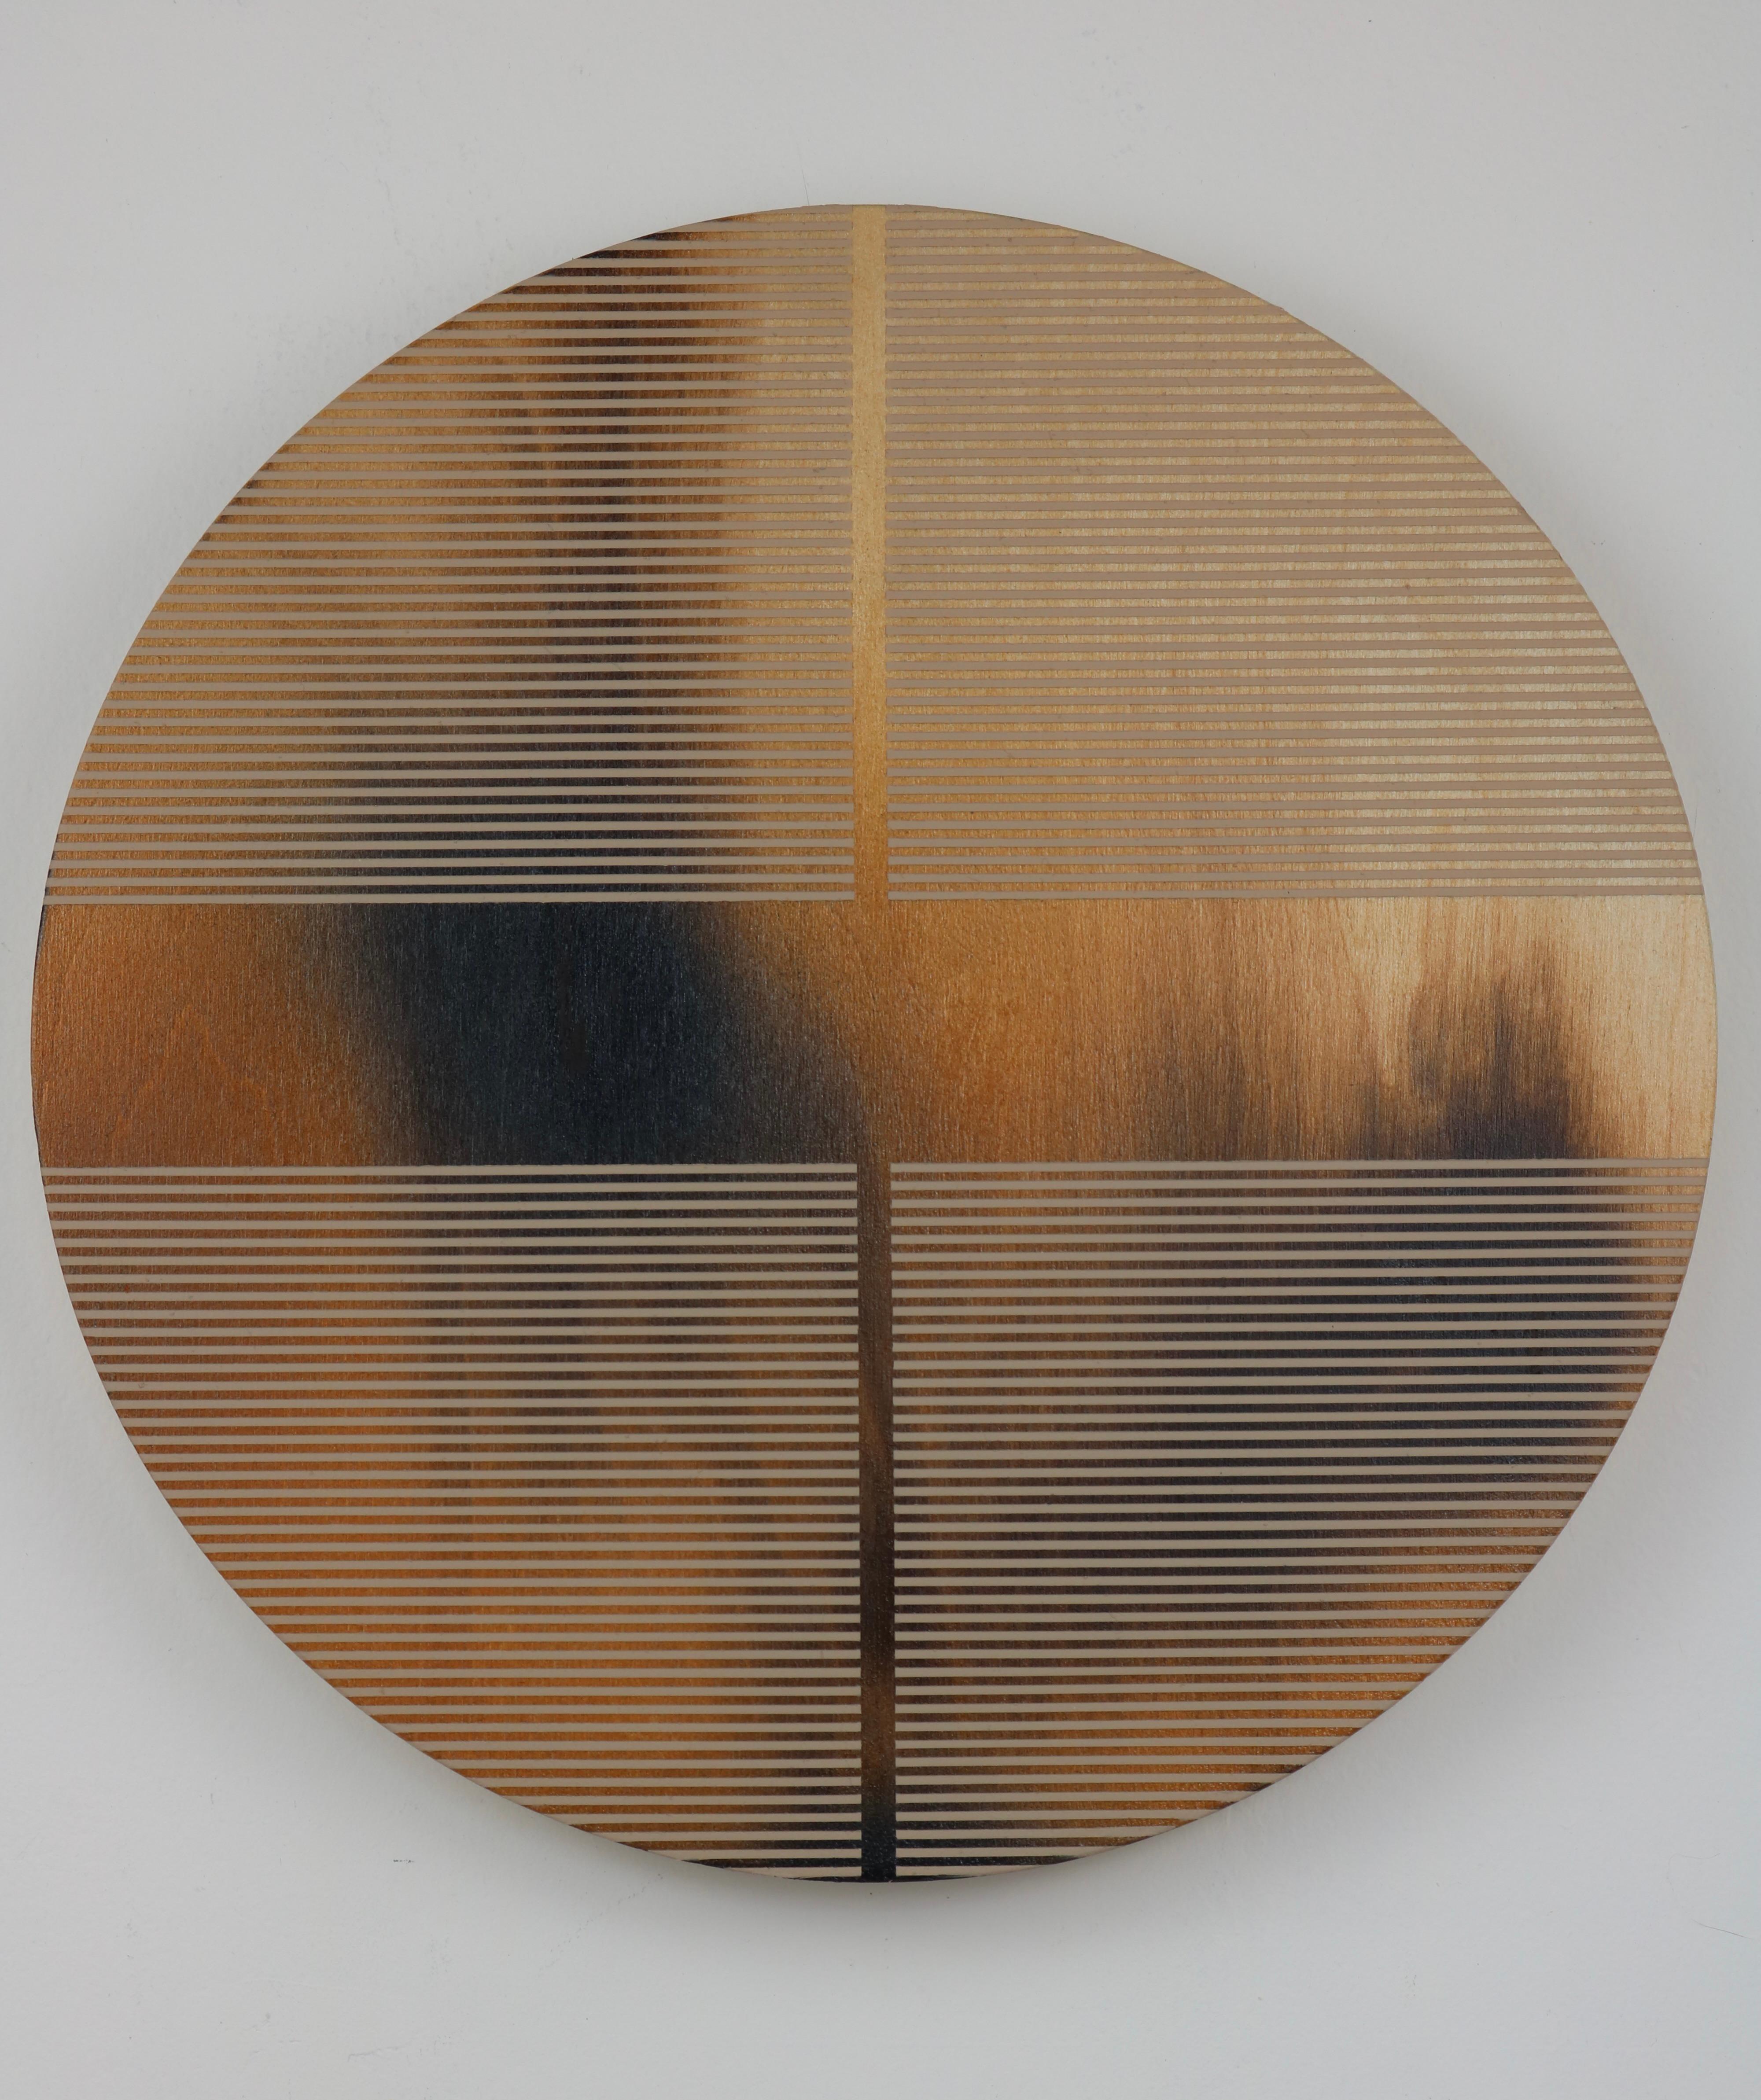 Melisa Taylor Metzger Abstract Painting - Caramel toffee pill (minimaliste grid round painting on wood dopamine tan art)